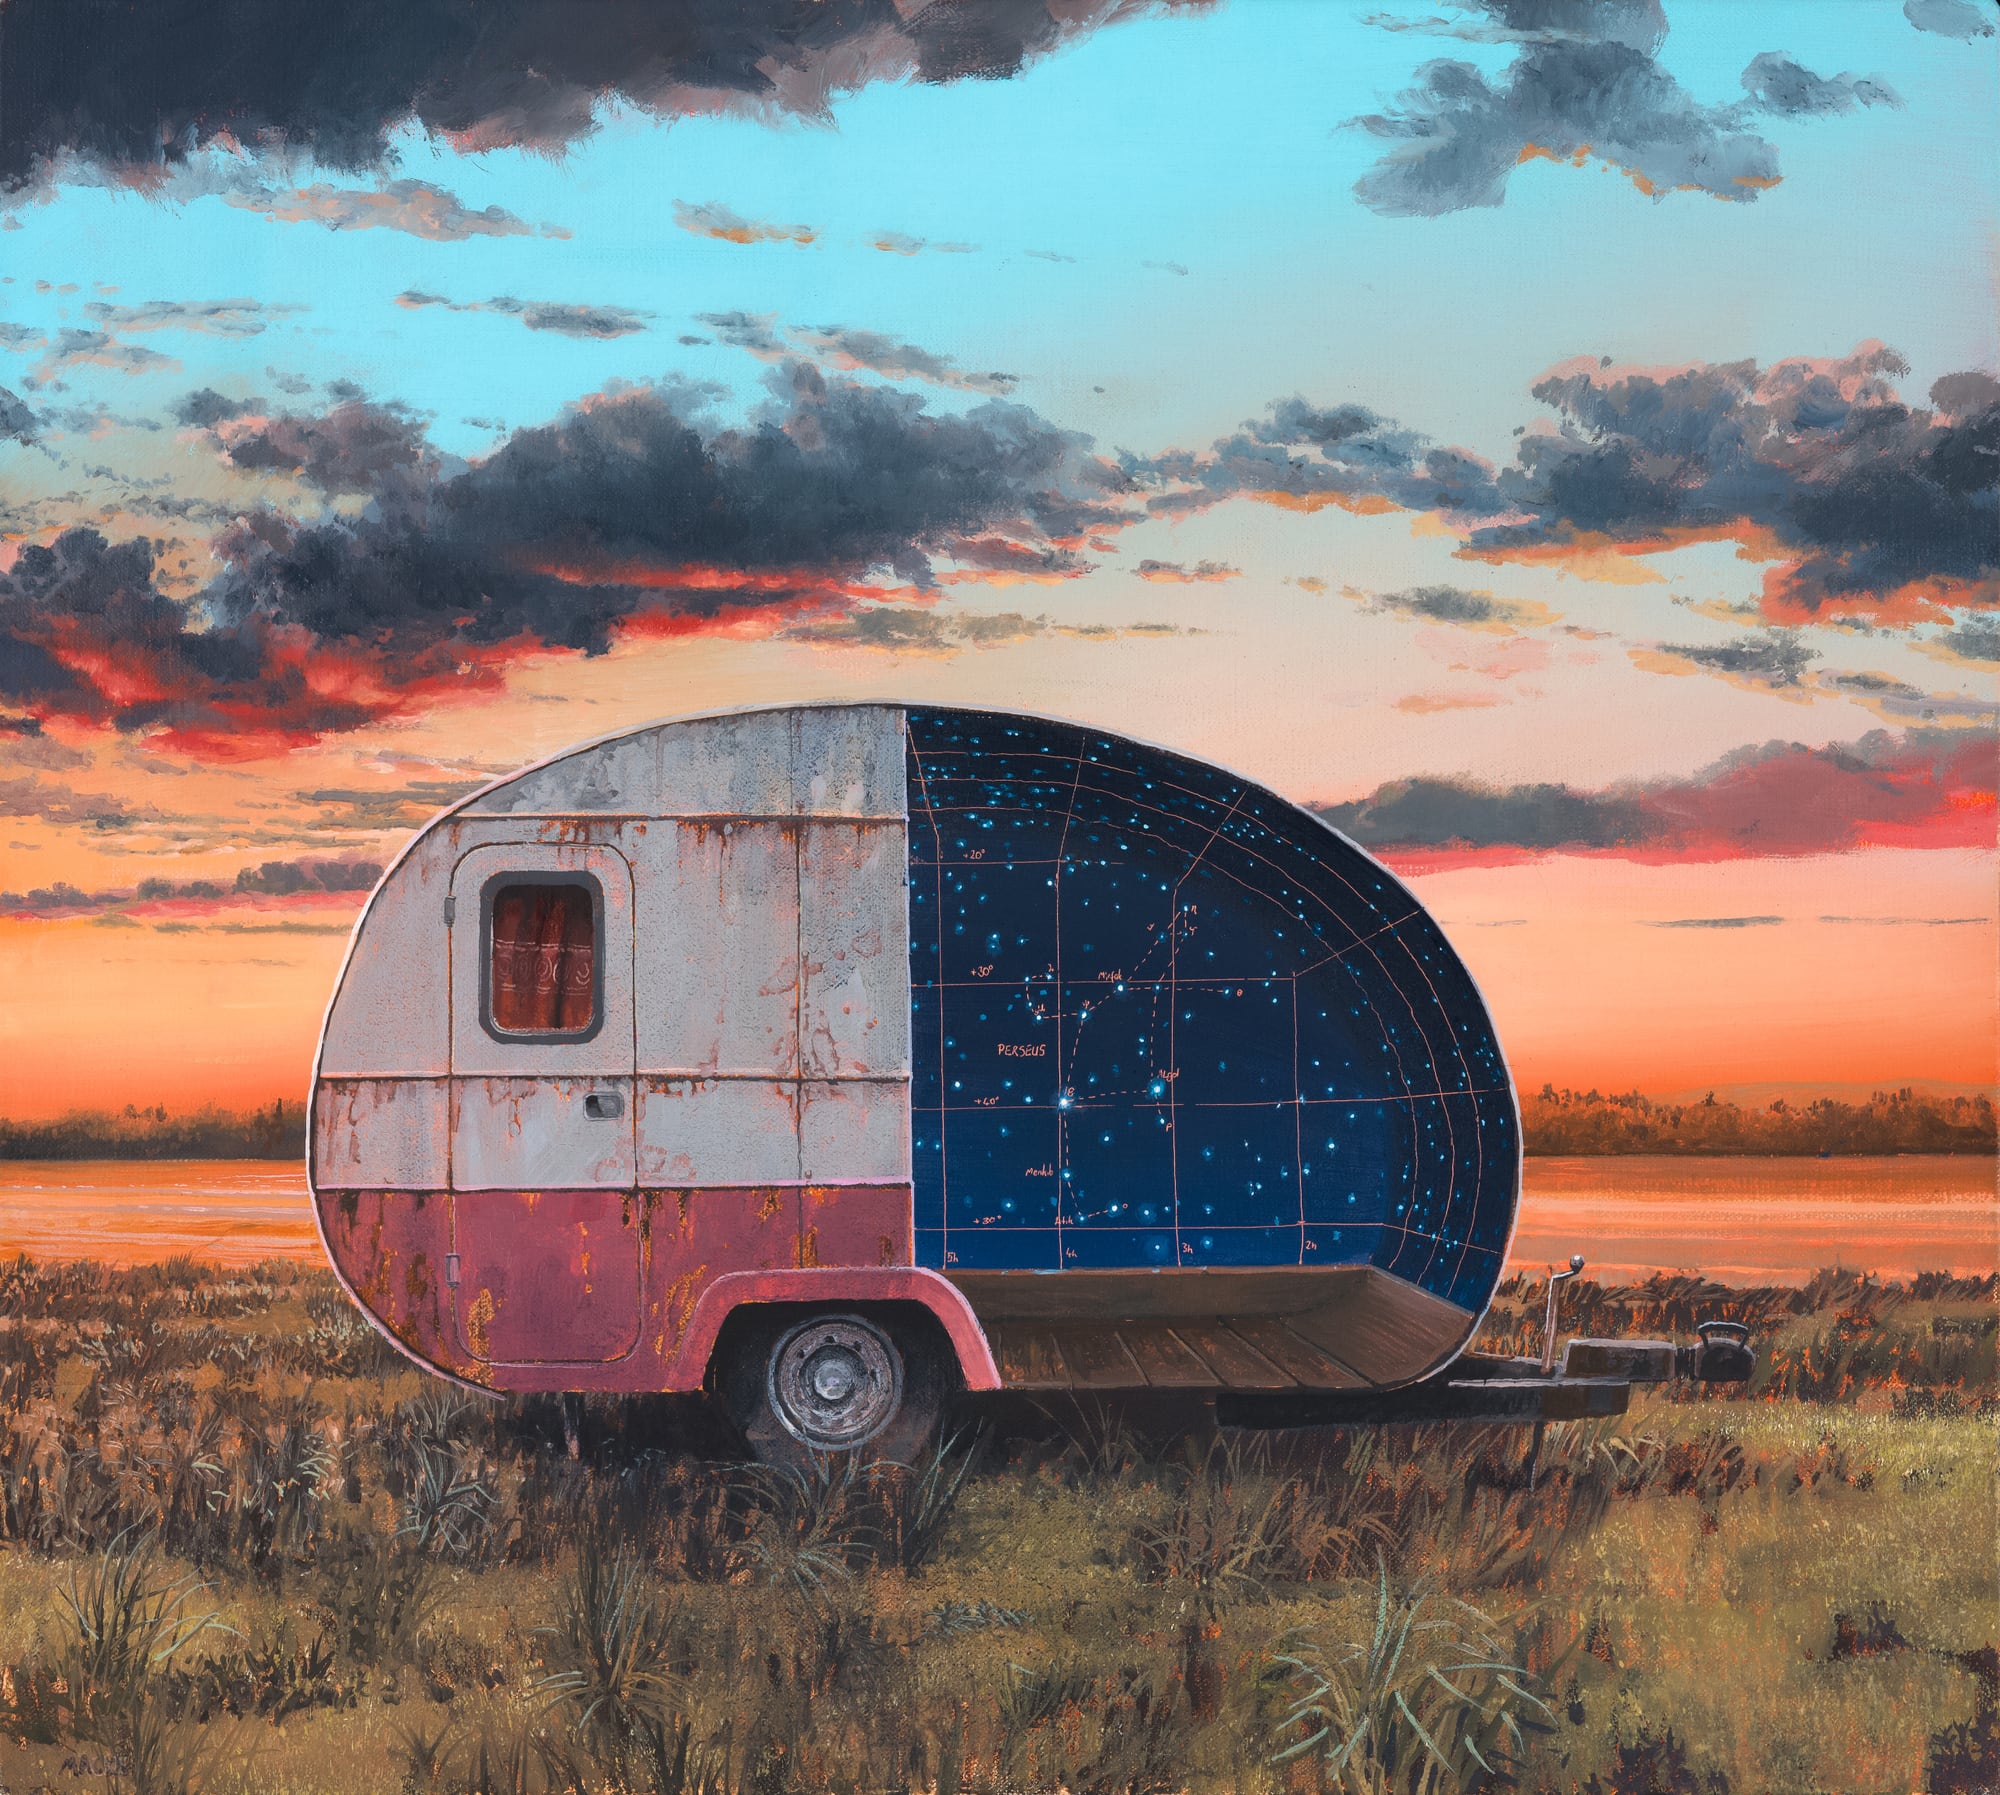 Abandoned Caravans and Castles House Mysterious Illuminated Portals in Andrew Mcintosh’s Paintings